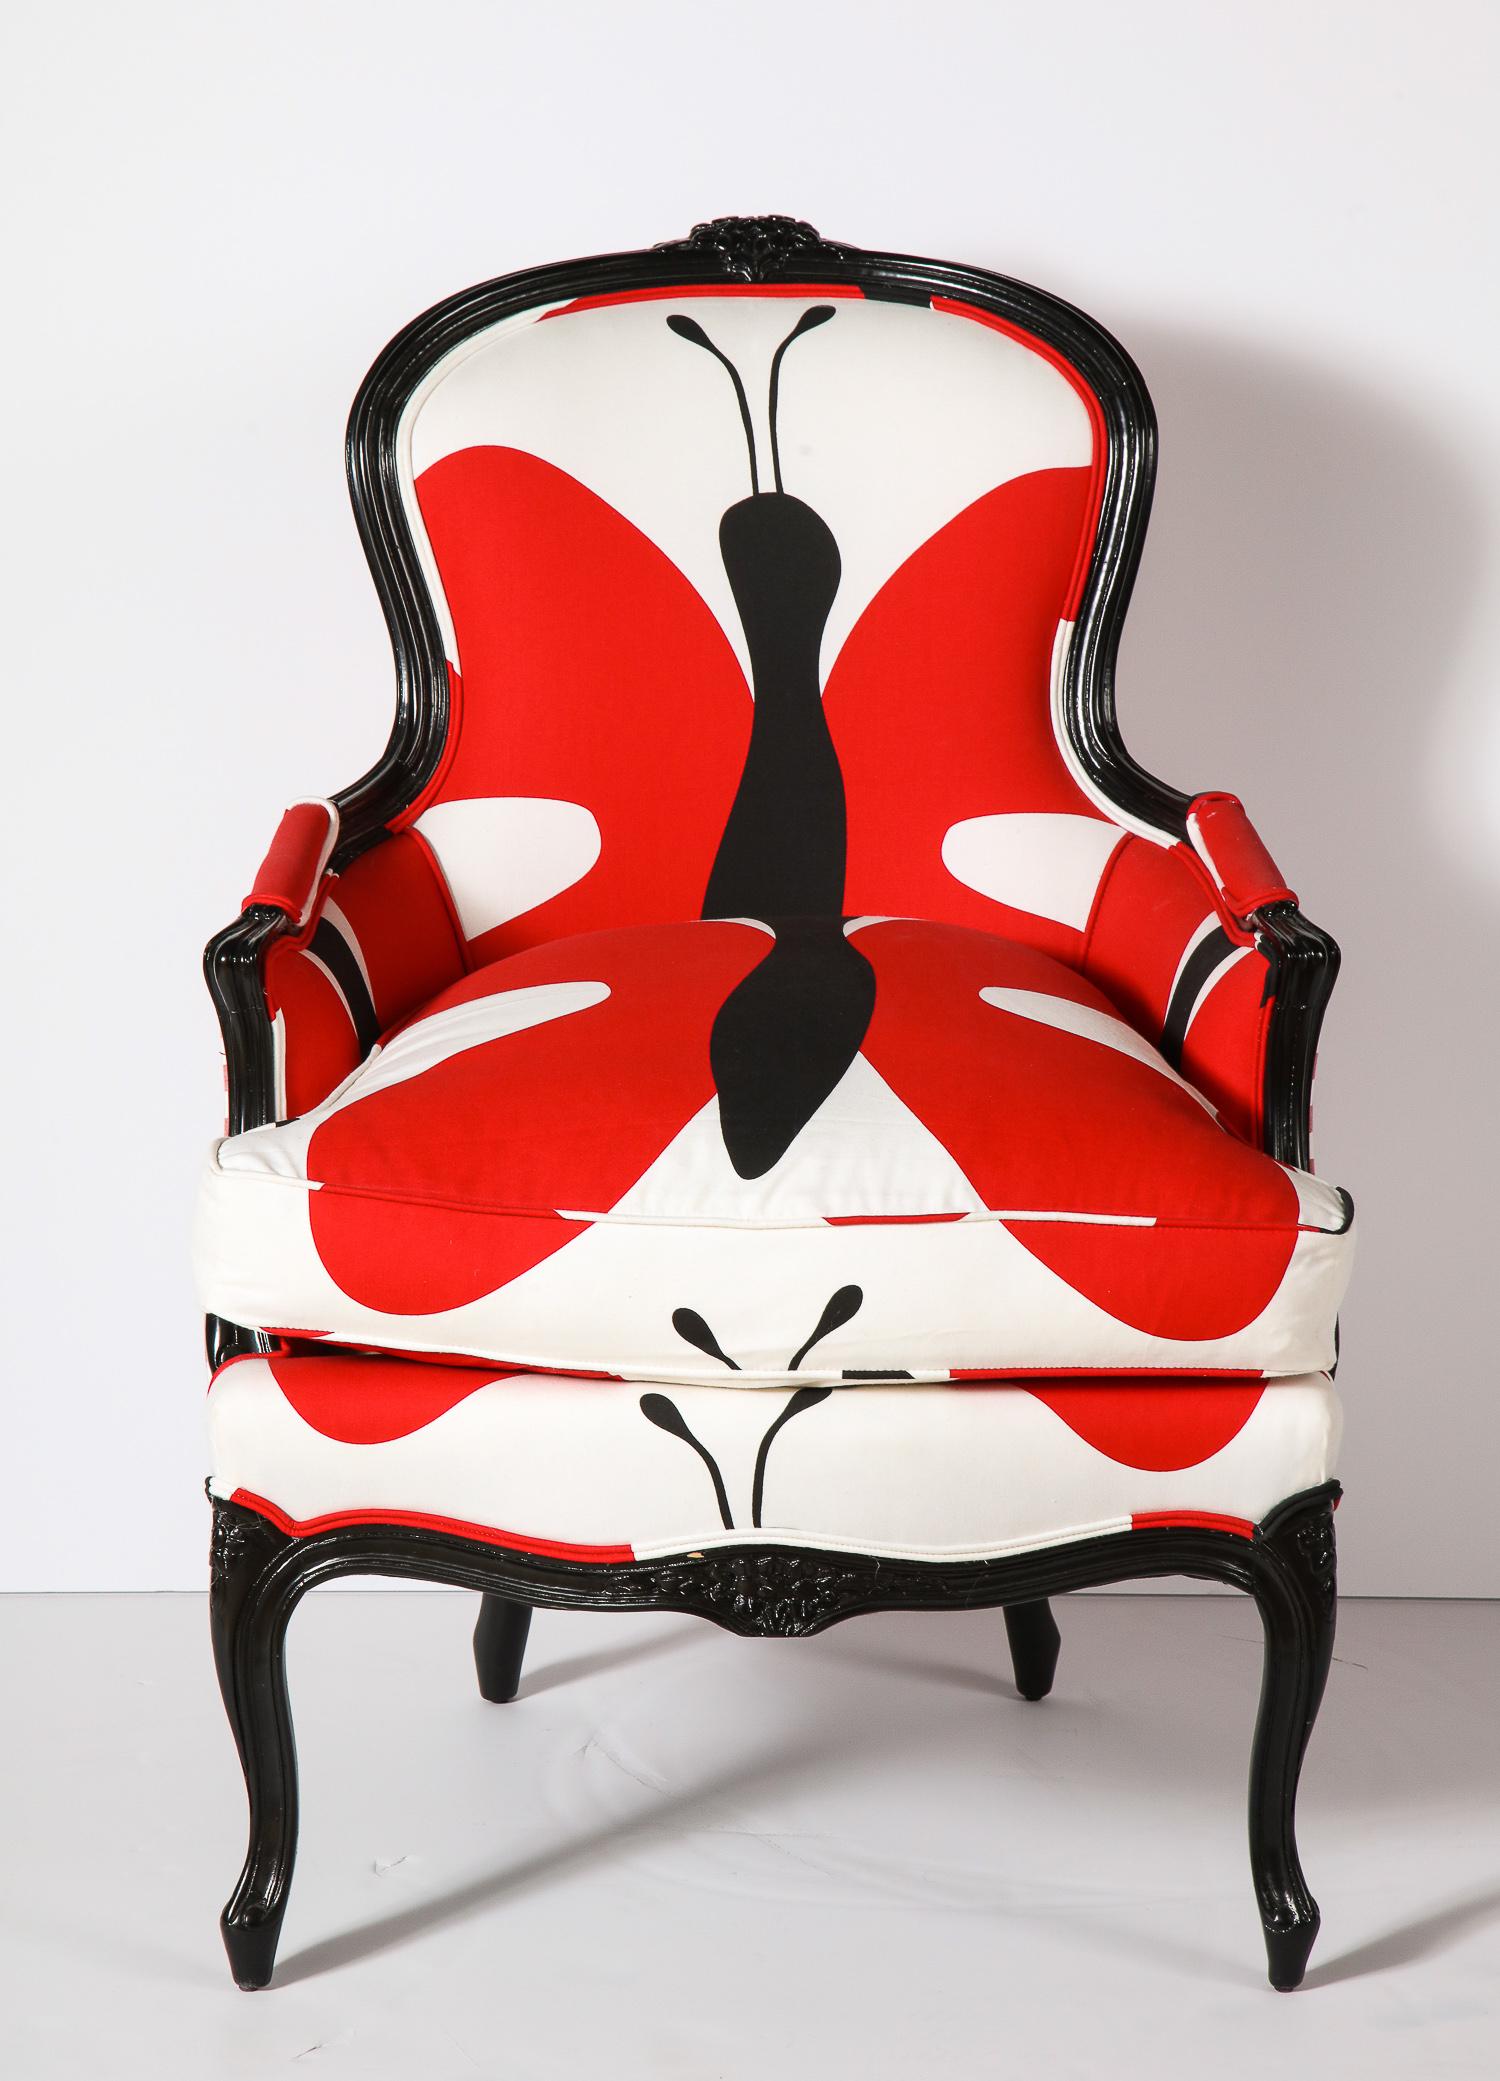 Decorative vintage Bergère chair designed in 100% cotton printed fabrics. Wood is black lacquer. Seat height is 18 inches. Seat cushion is filled with down.
The pictures are showing the arm rests in red fabric. It is now changed to the checker